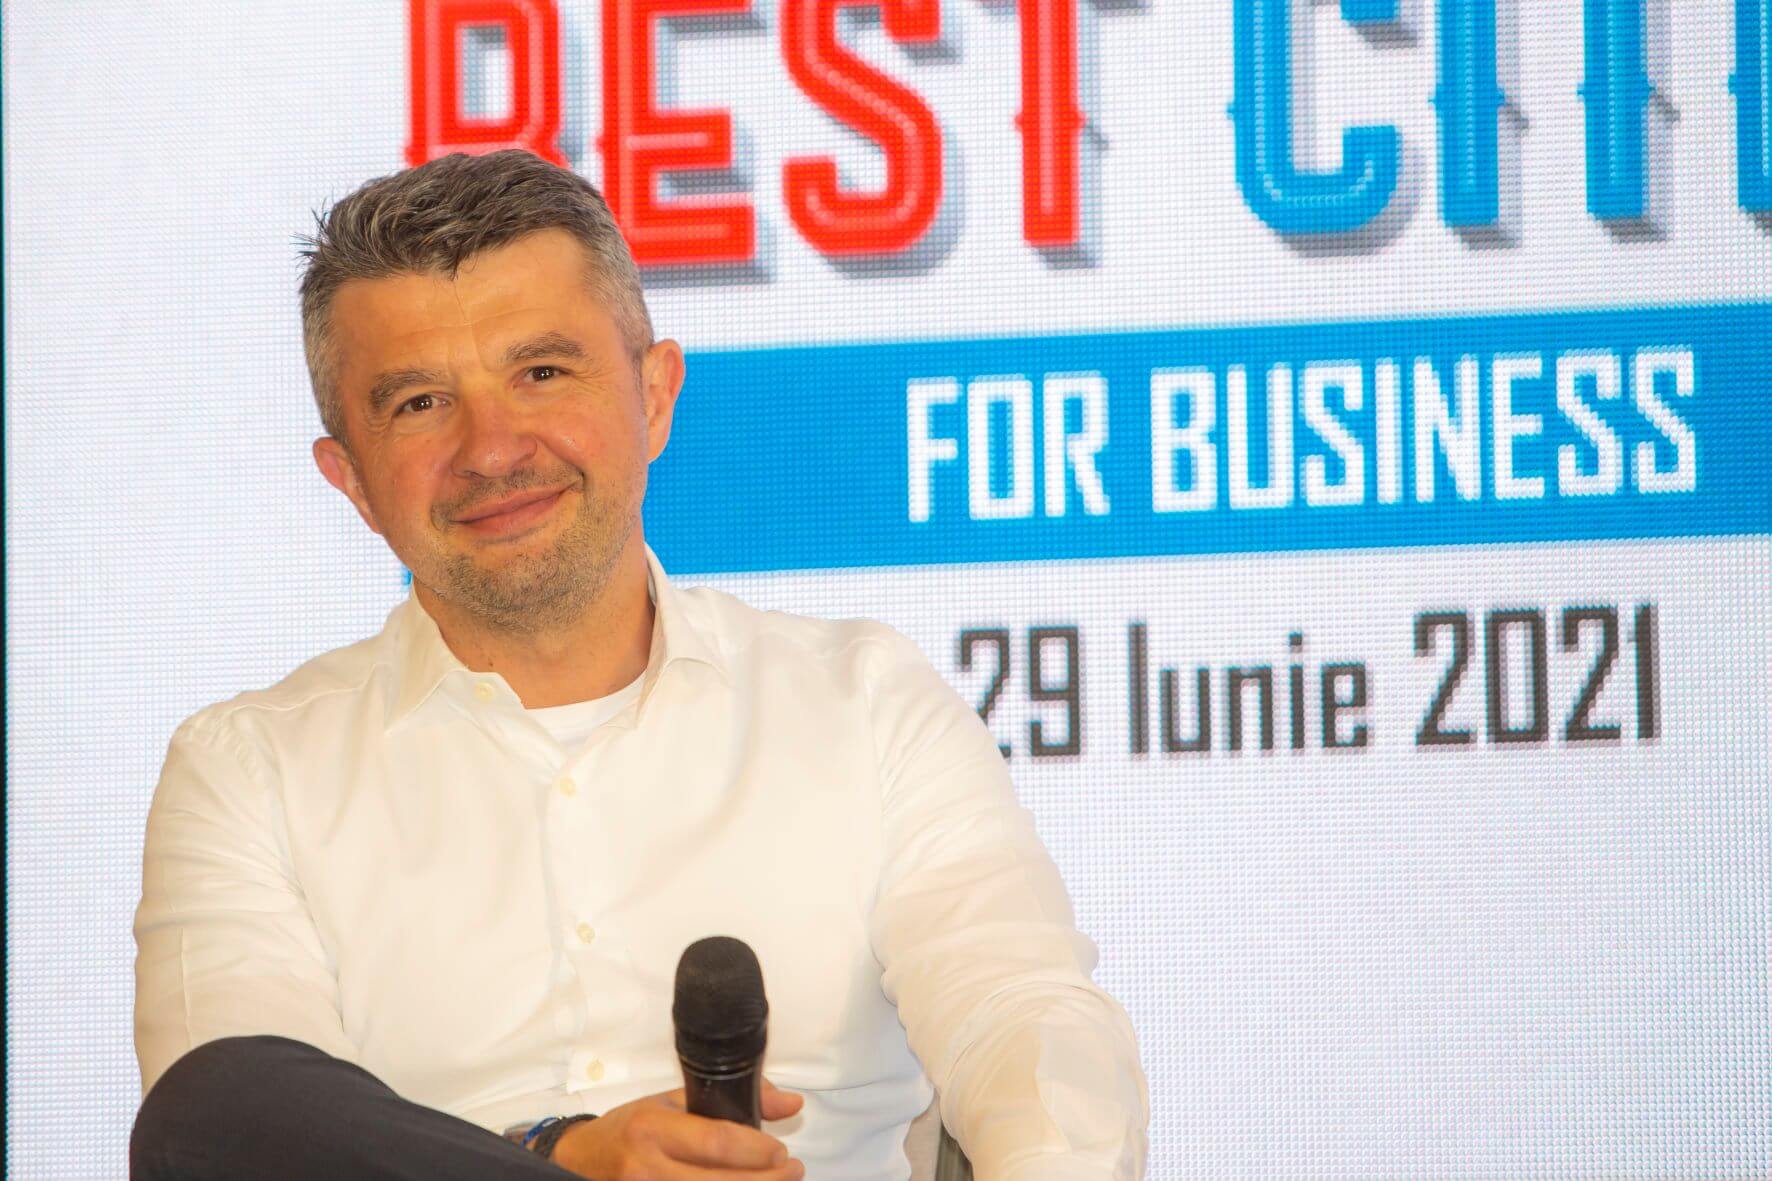 Calin Vaduva, CEO Fortech at Forbes Best Cities for Business 